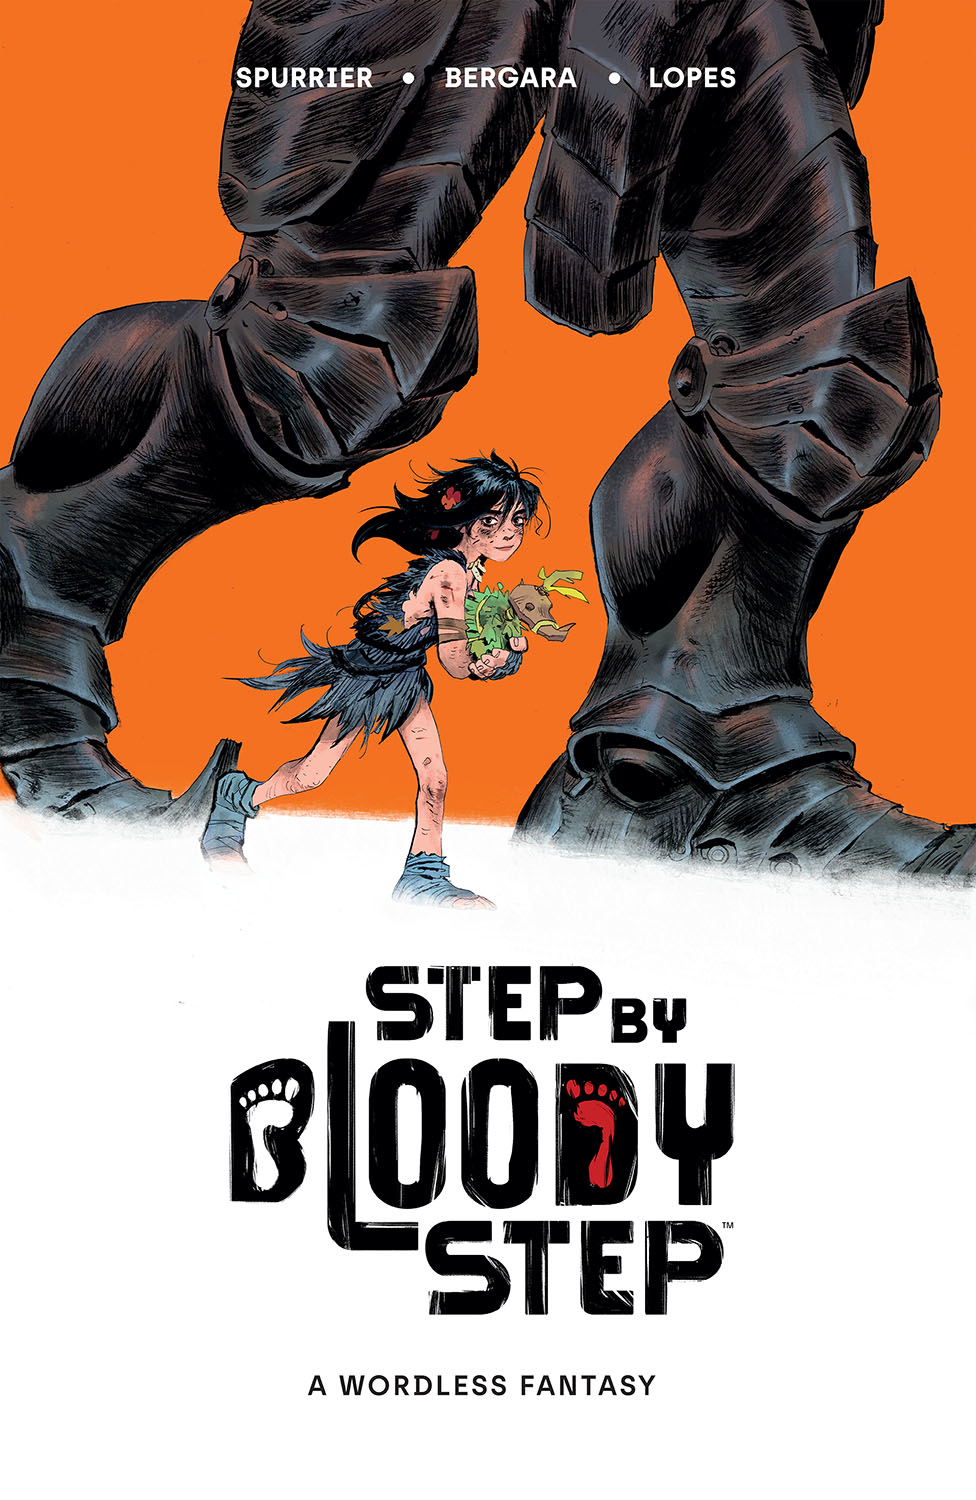 Step by Bloody Step Graphic Novel